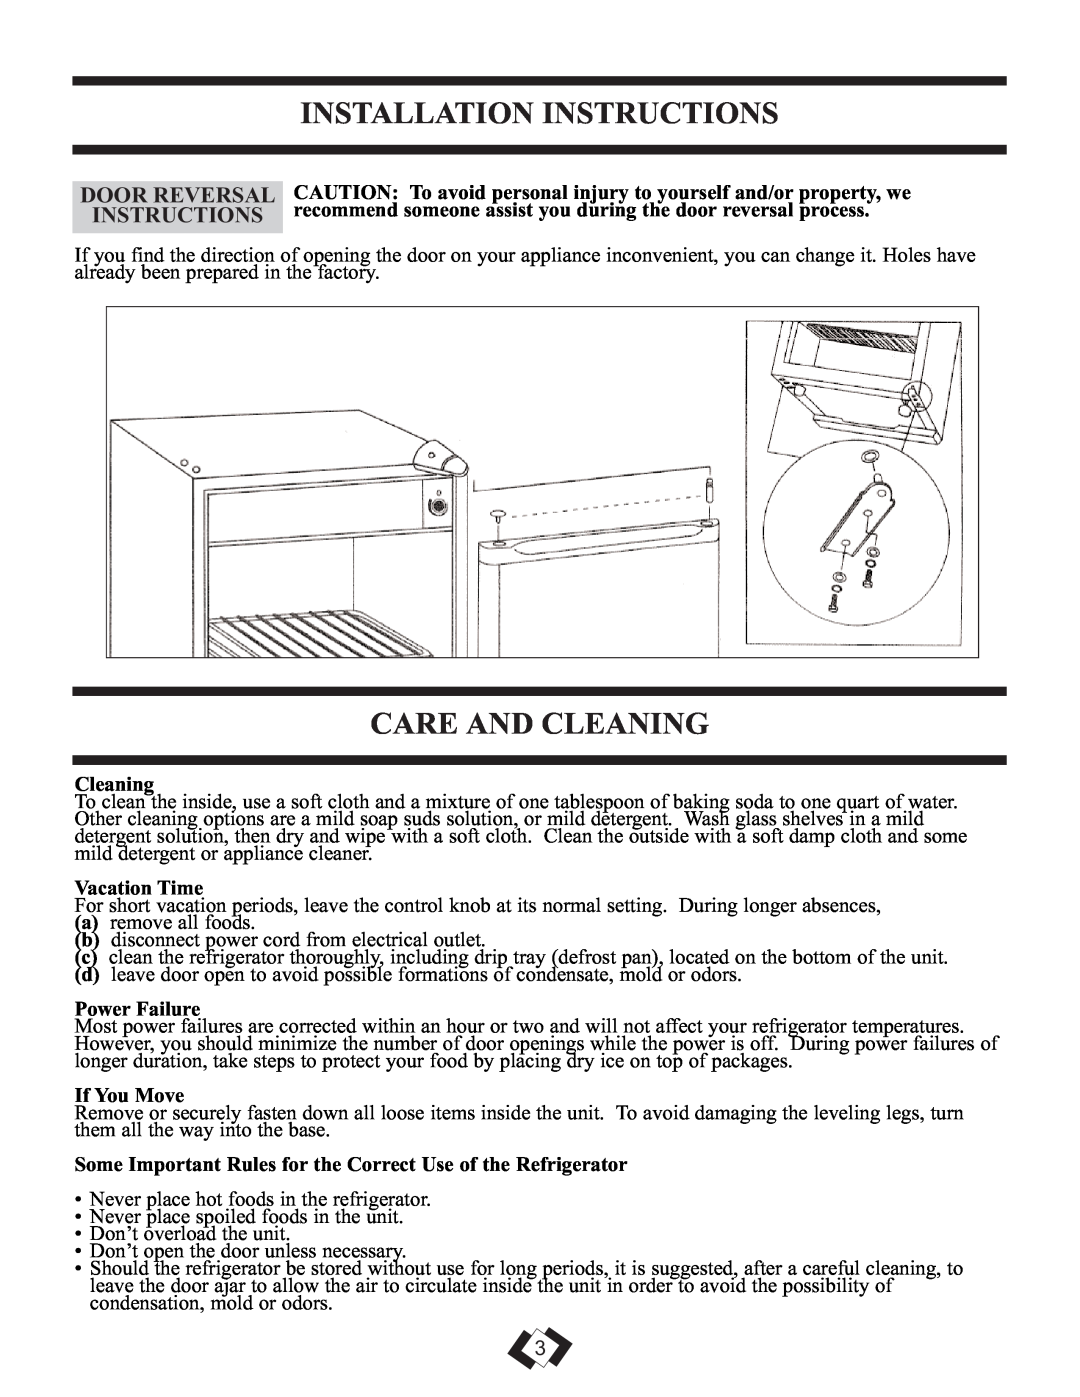 Sunbeam SBCR039W Installation Instructions, Care And Cleaning, Door Reversal, Vacation Time, Power Failure, If You Move 